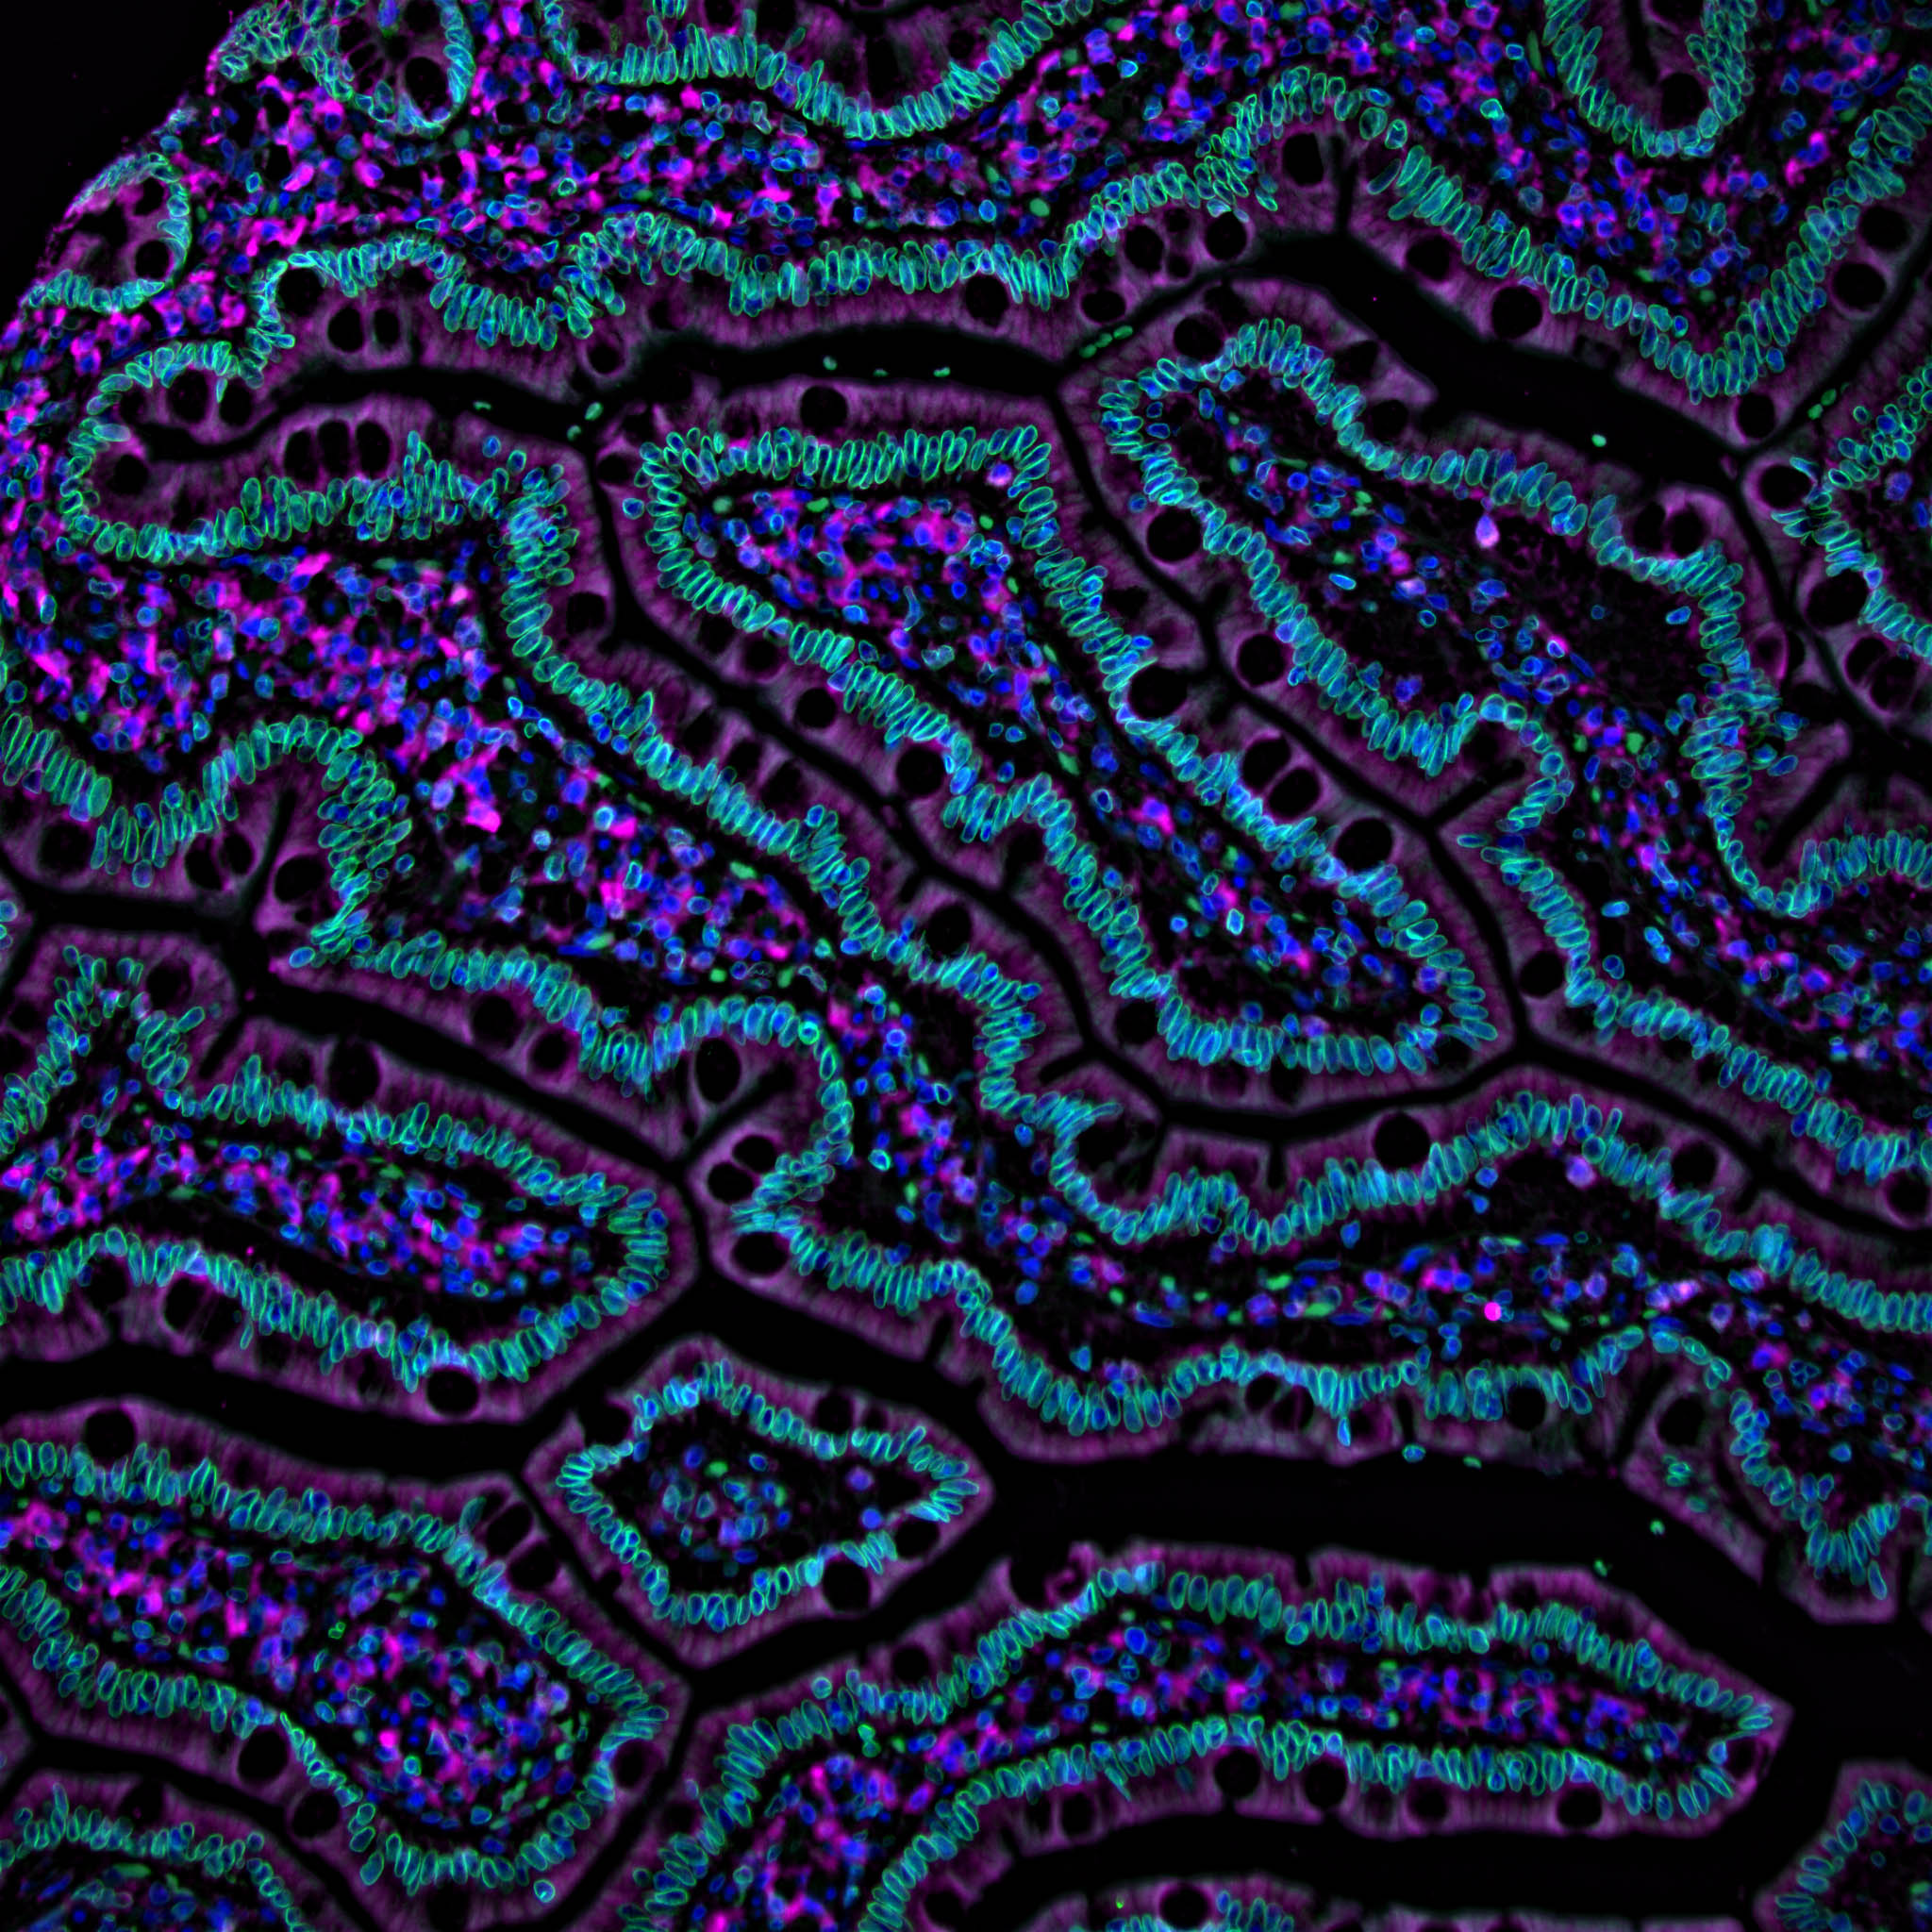 An immunofluorescence image of the first part of the small intestine, called the duodenum (CZI Single-Cell Biology).